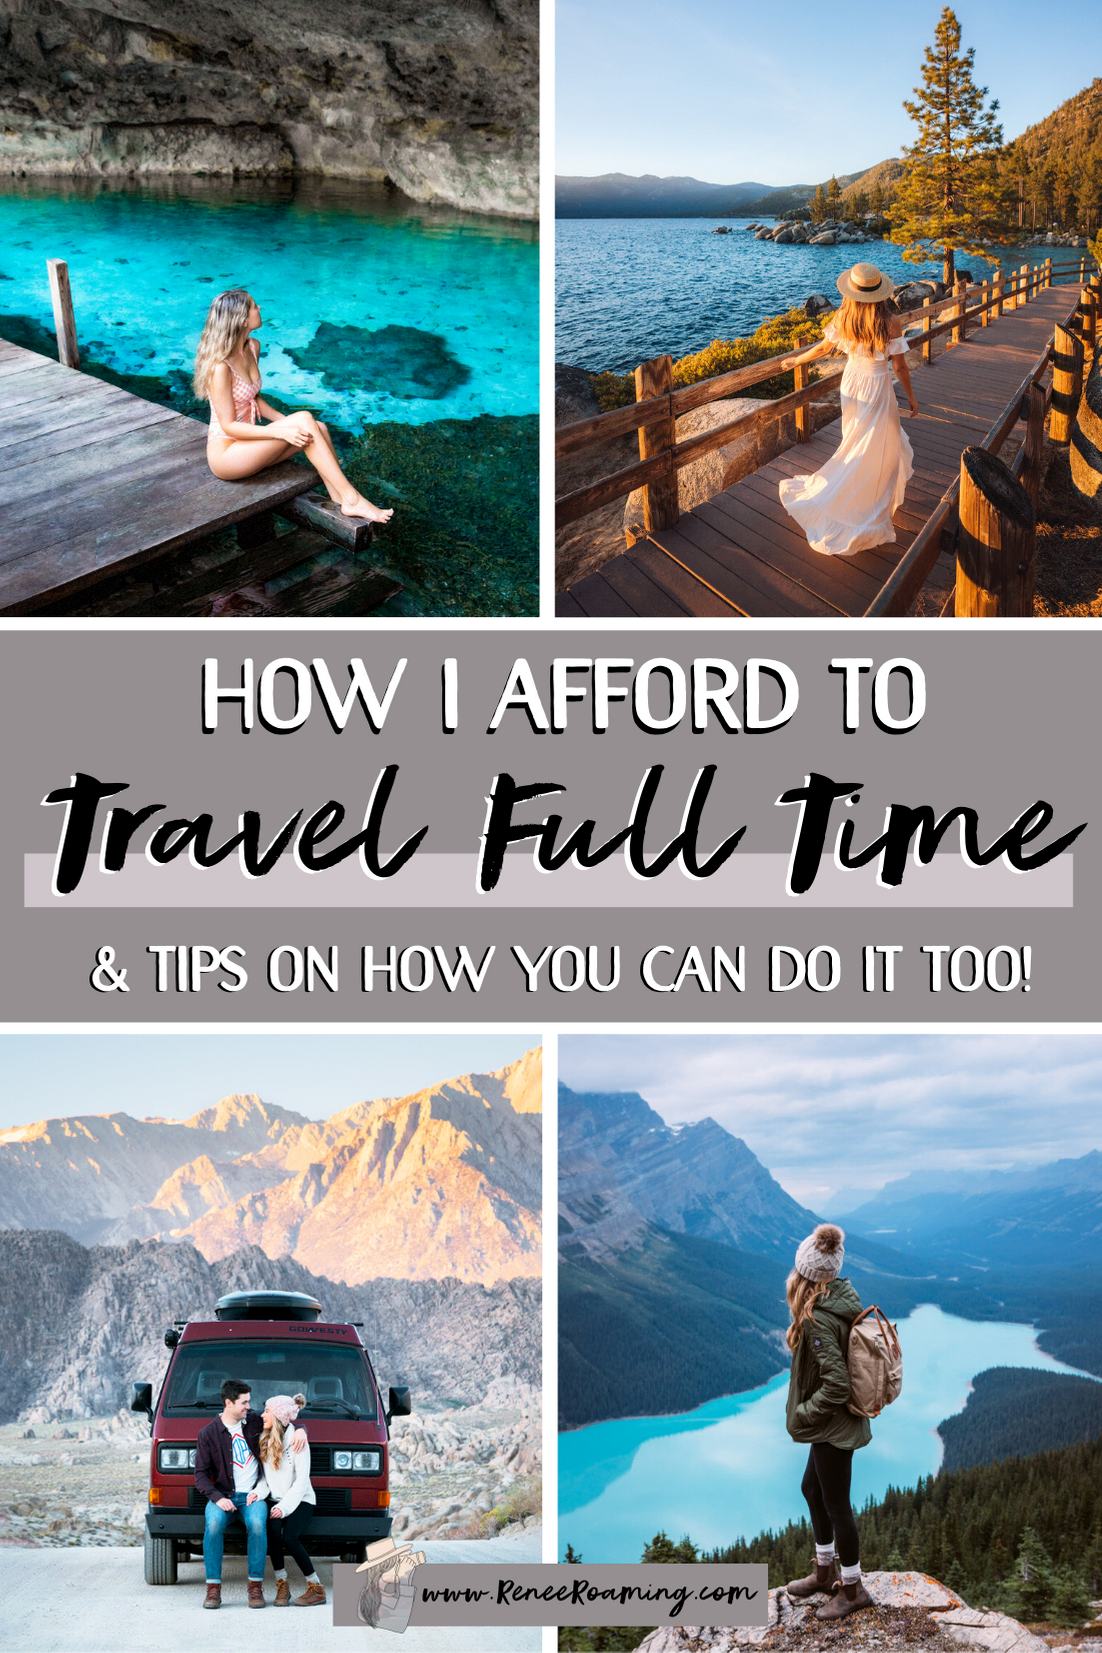 How To Travel Full Time - Must Know Tips for Affording to Travel 